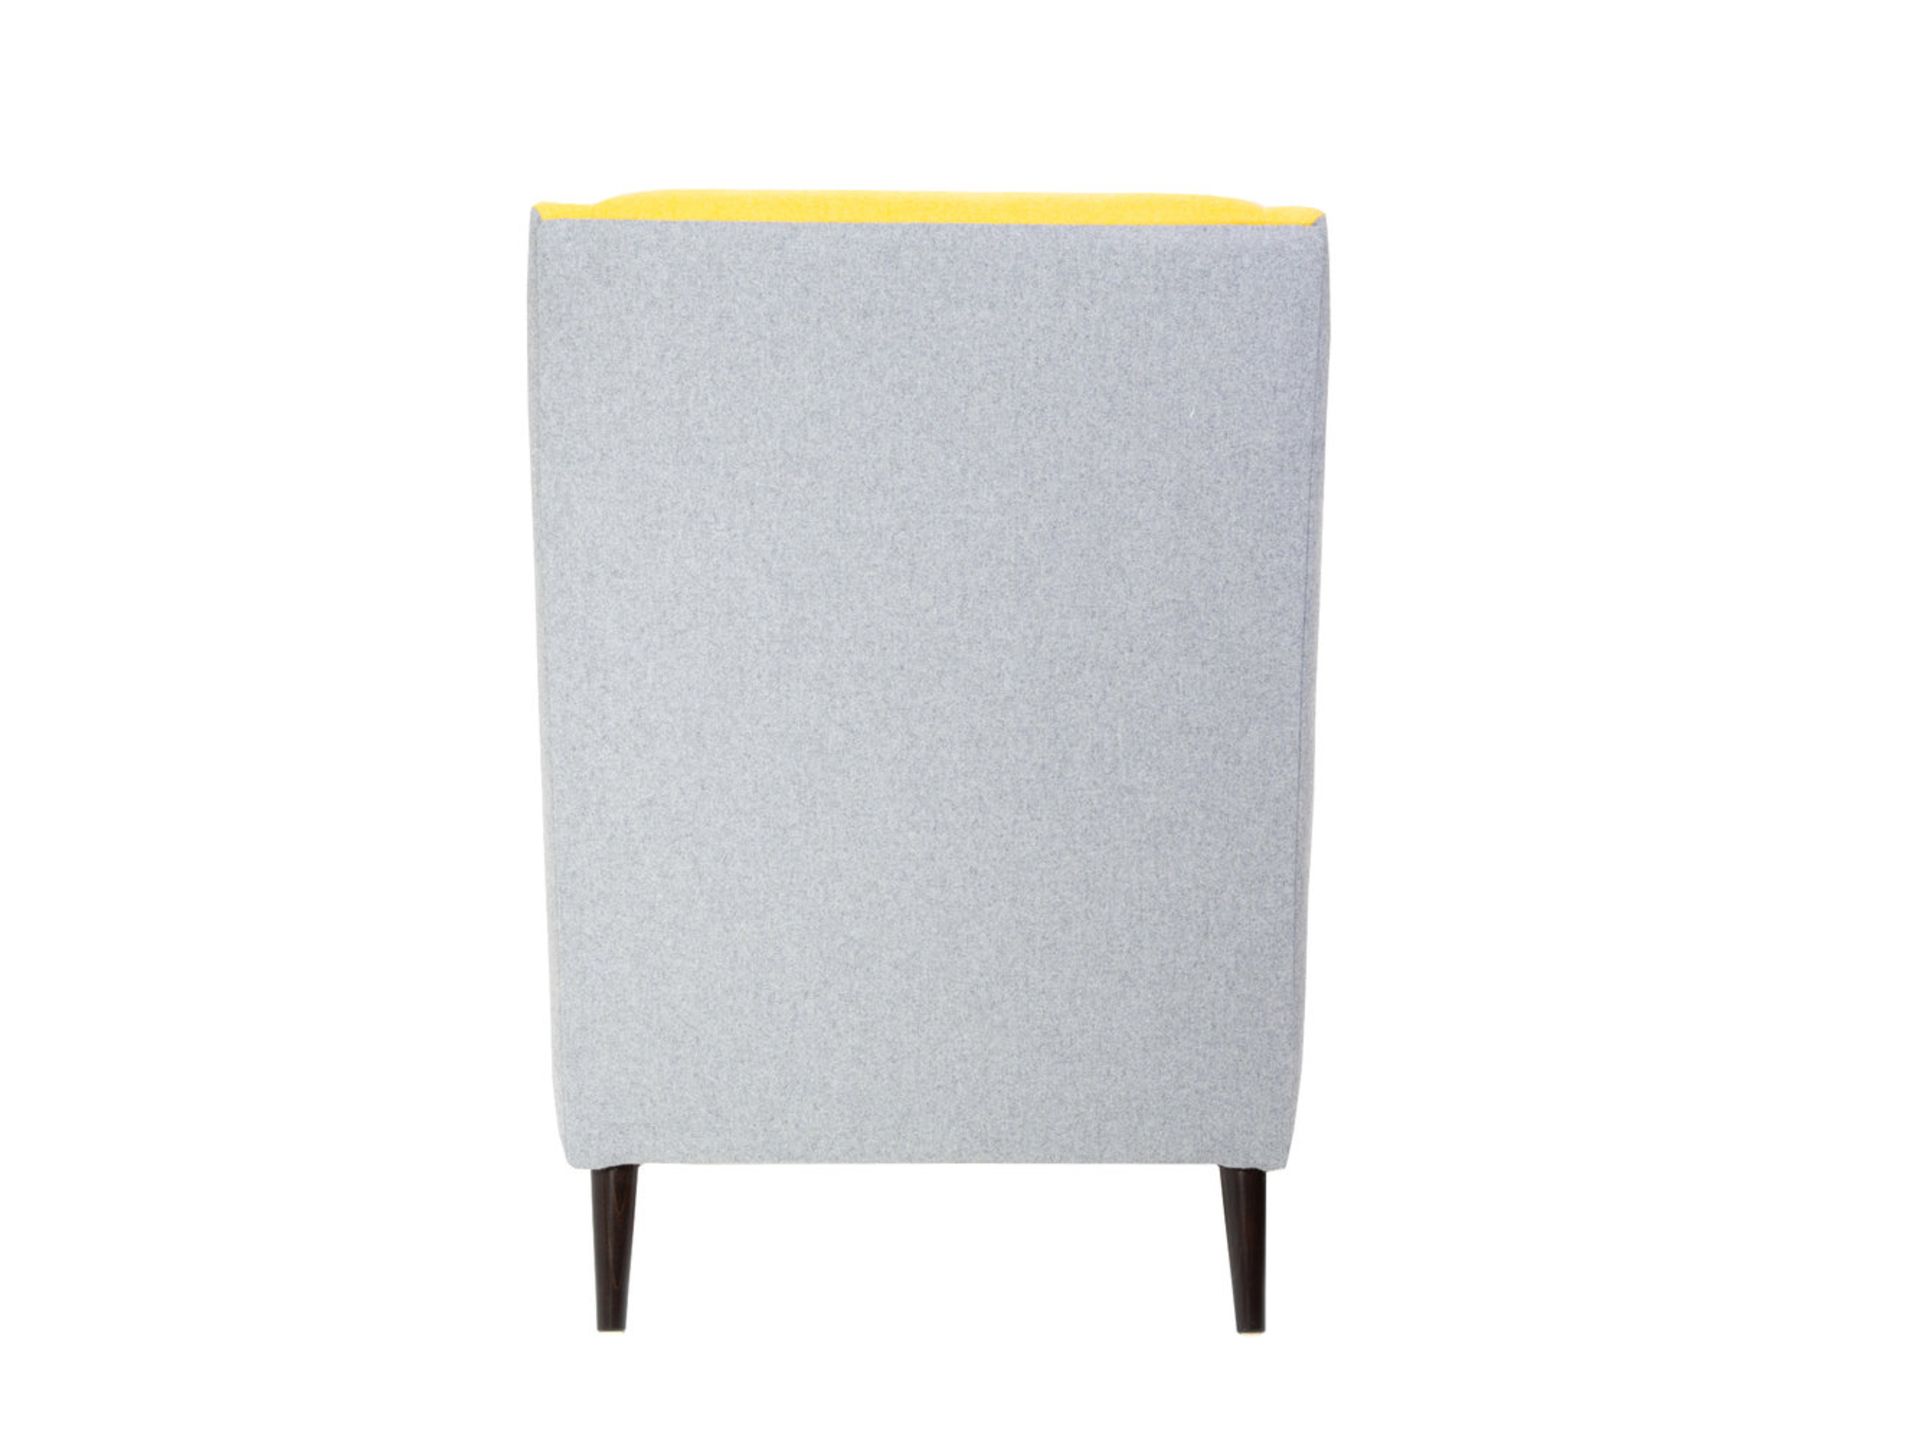 1 x Lauran Wolf & Sunshine Armchair - Two Tone Wool Fabric in Yellow and Grey - RRP £779! - Image 6 of 7